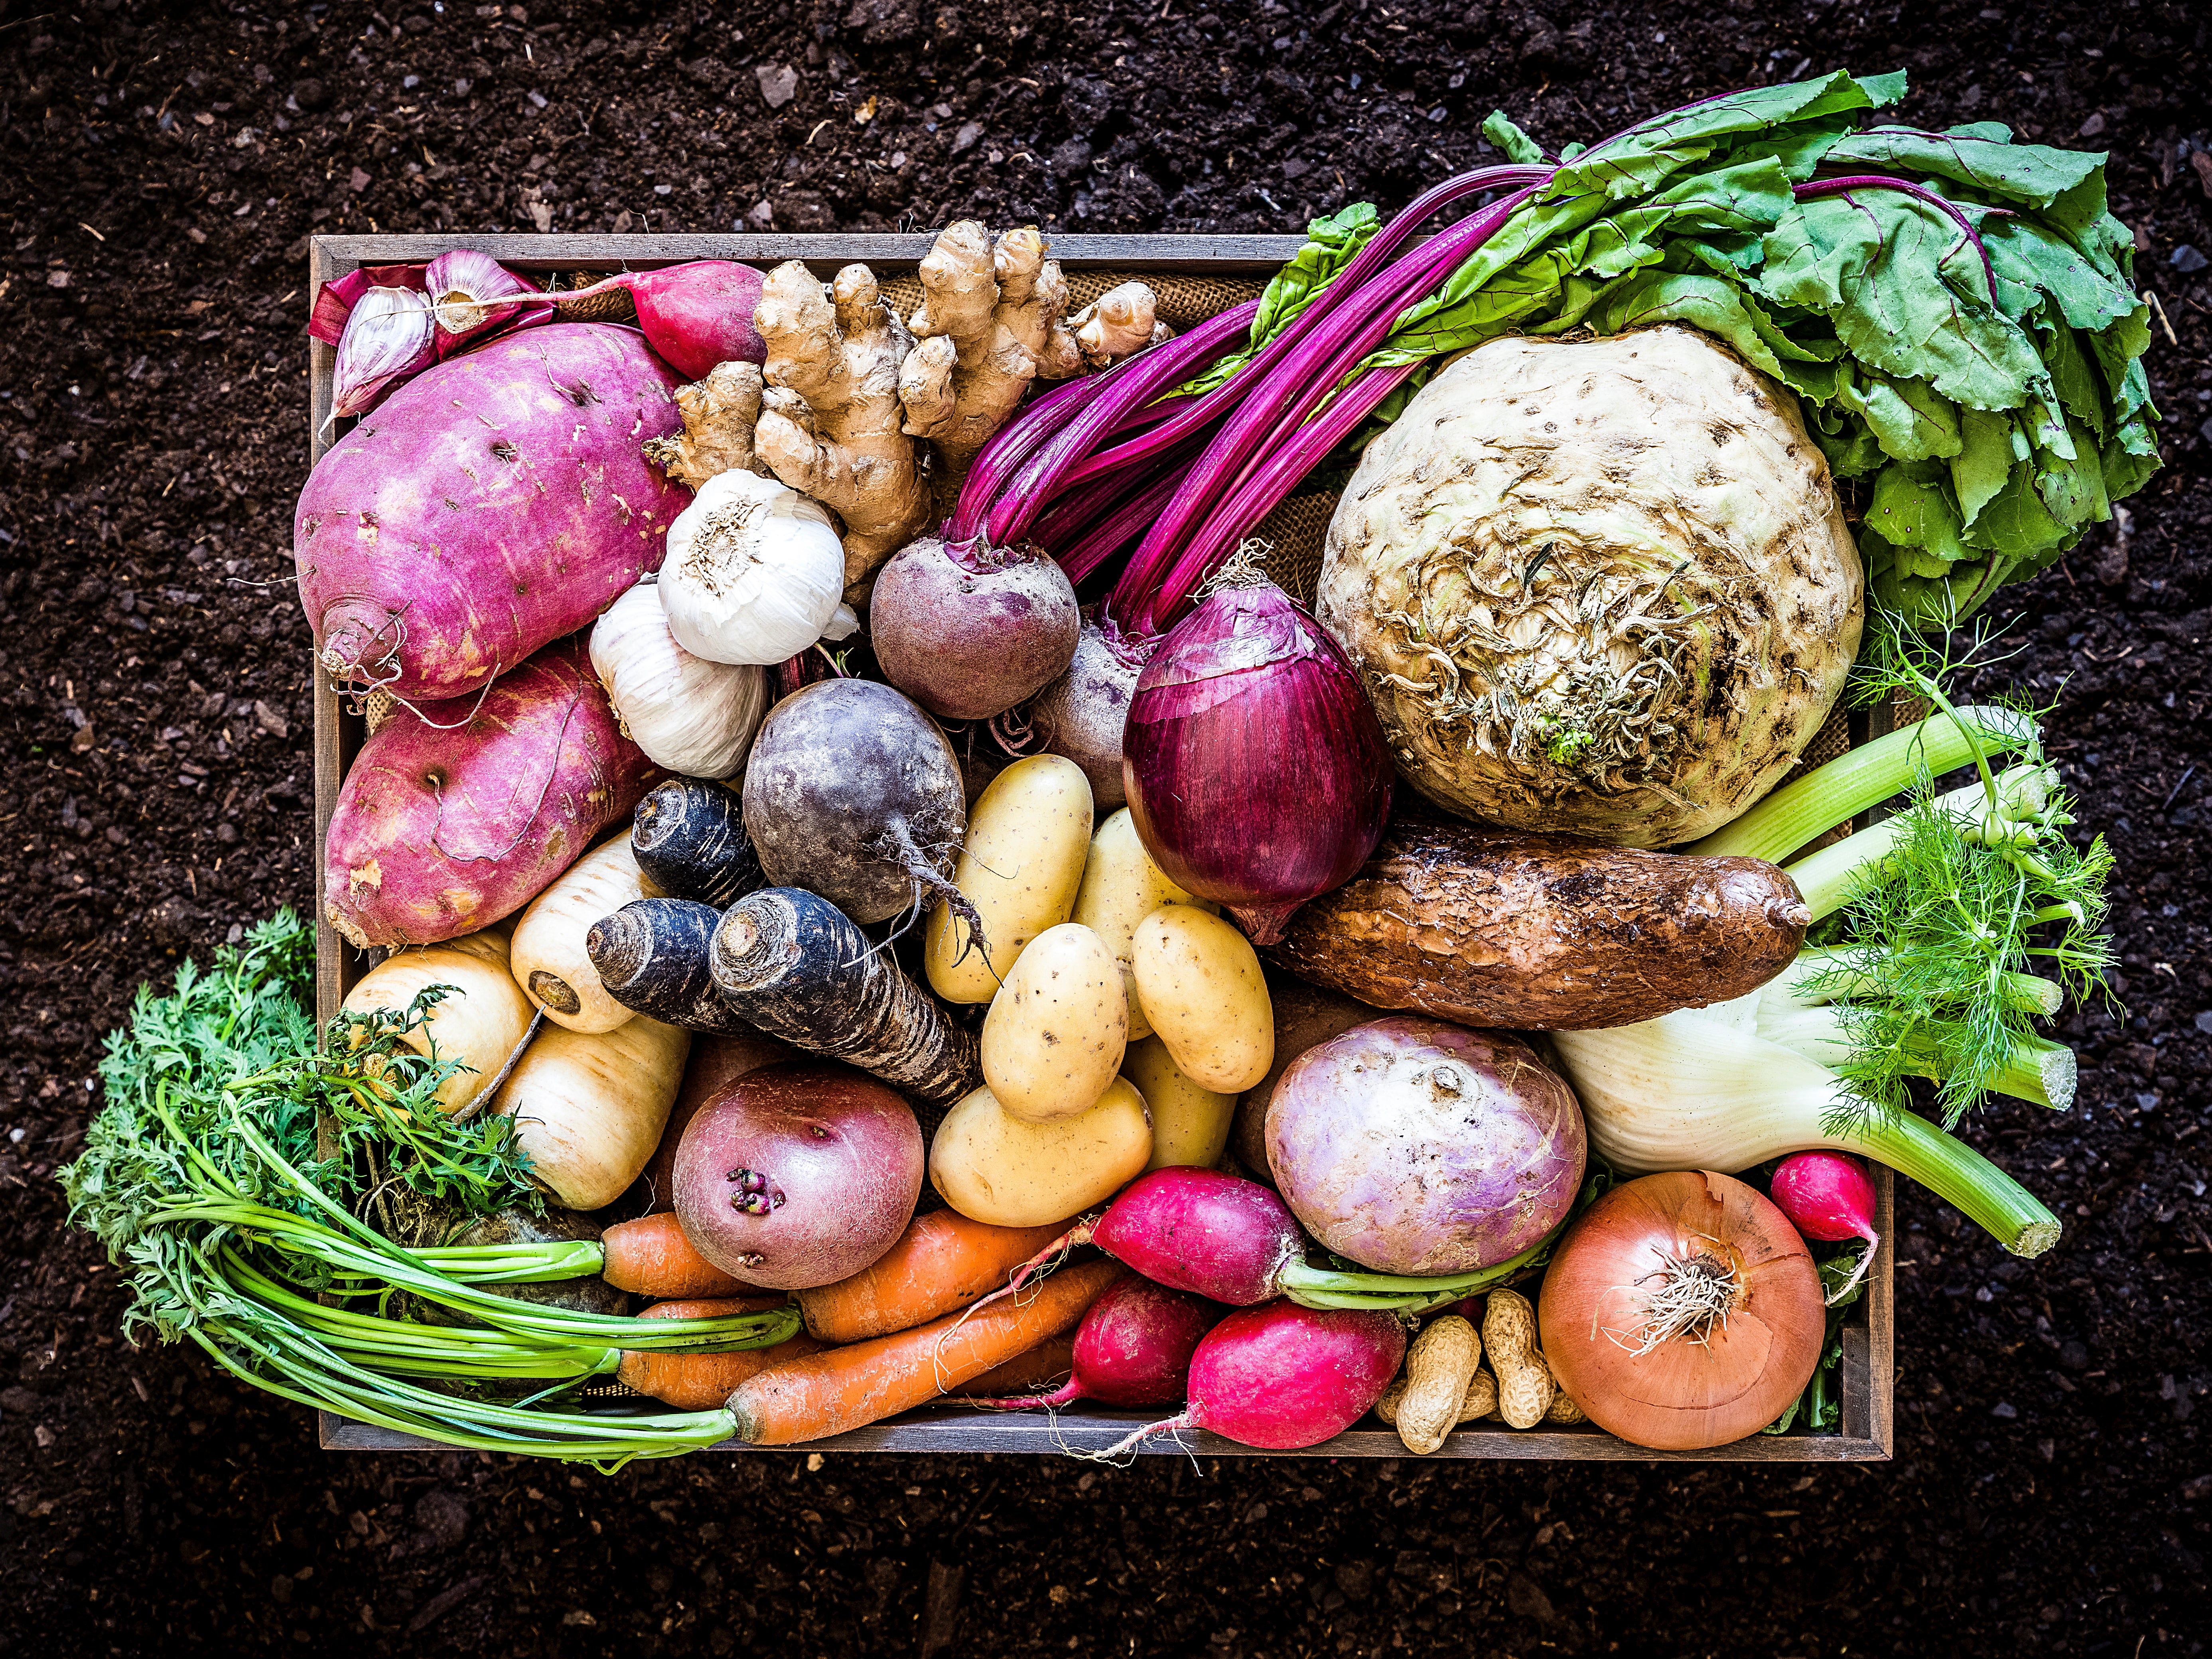 A new report shows shifting to a more plant-based diet is instrumental in improving both the health of humans and the planet